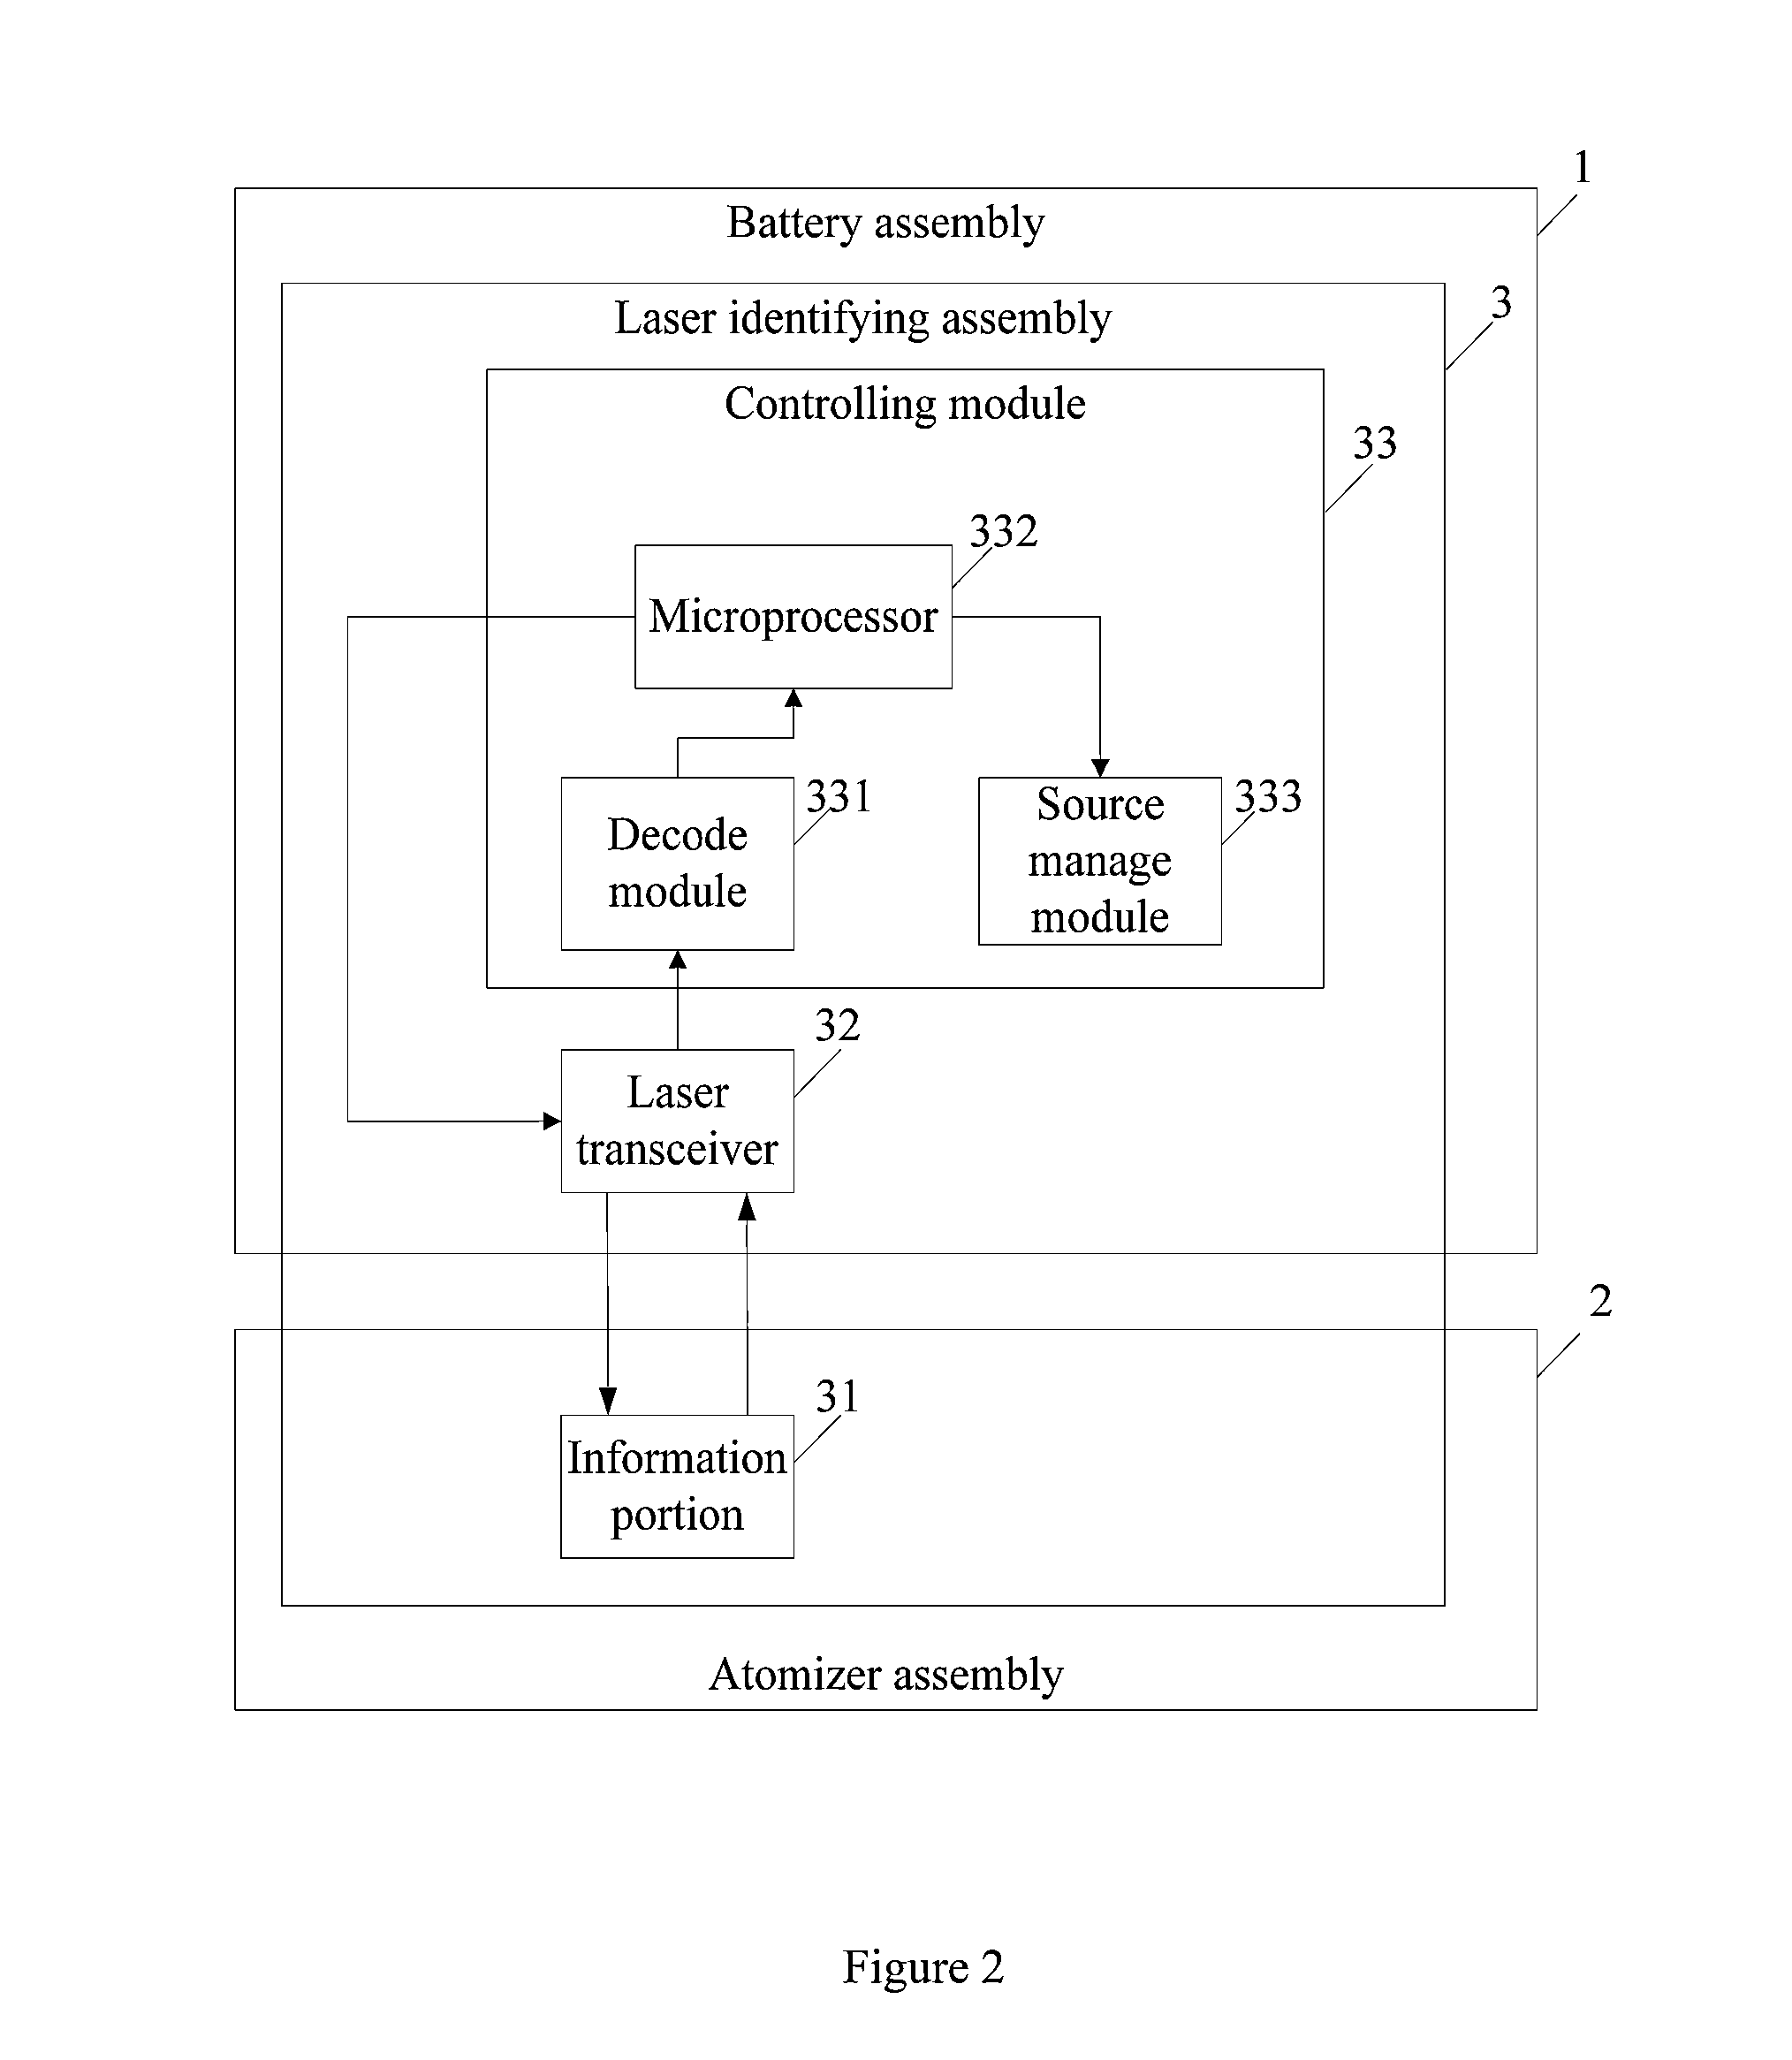 Electronic cigarette and method for identifying whether there is a match between a battery component and an atomizer component therein